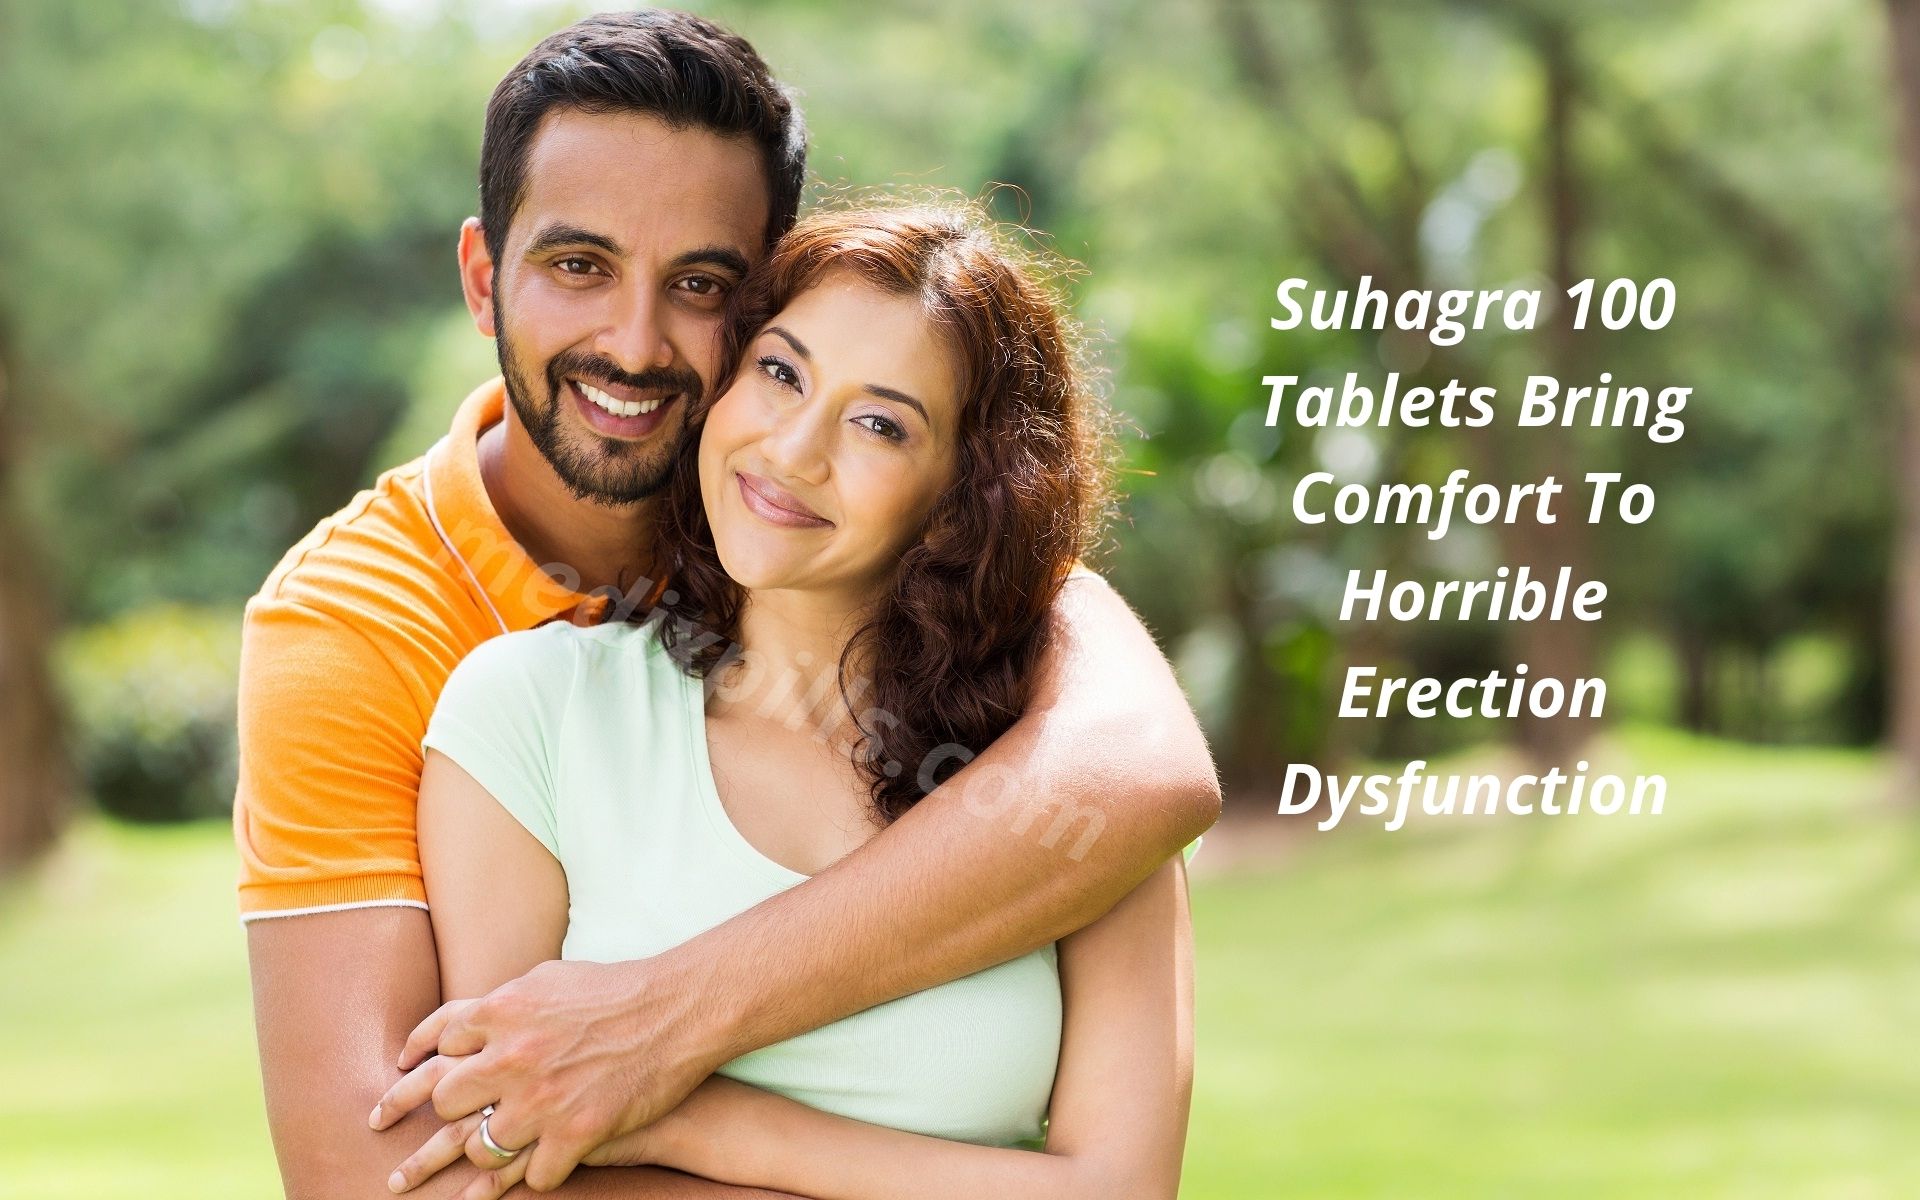 Suhagra 100 Tablets Bring Comfort To Horrible Erection Dysfunction